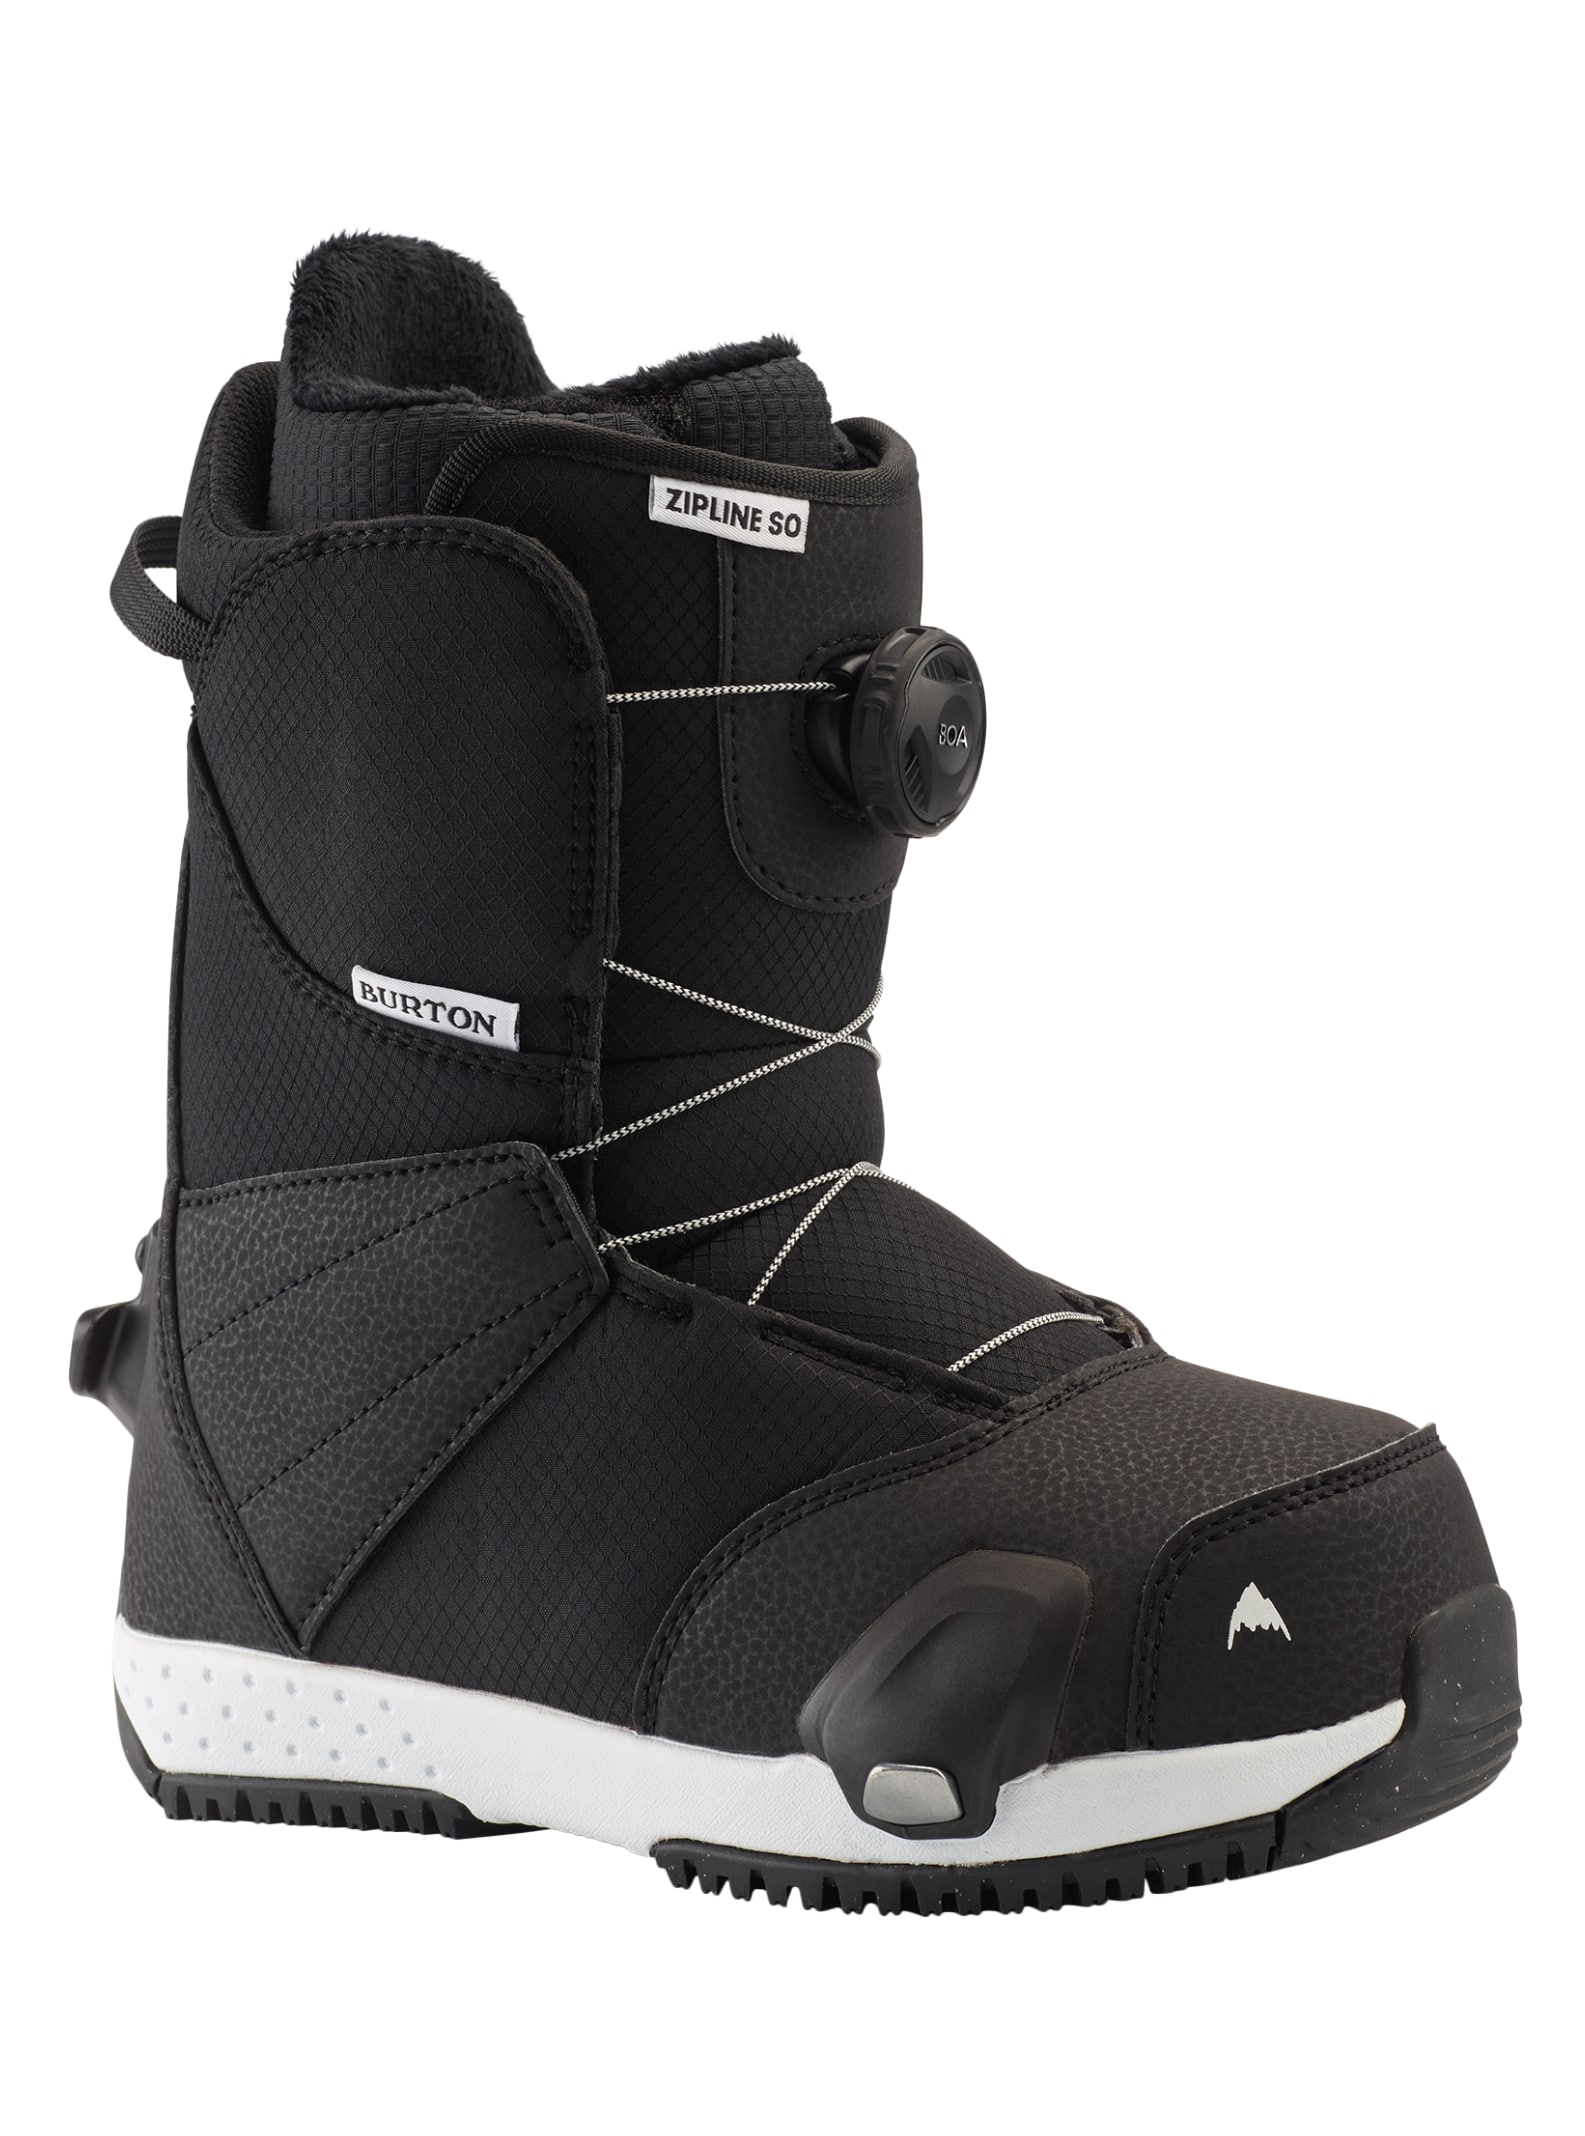 Snowboard Boots Youth Size Chart